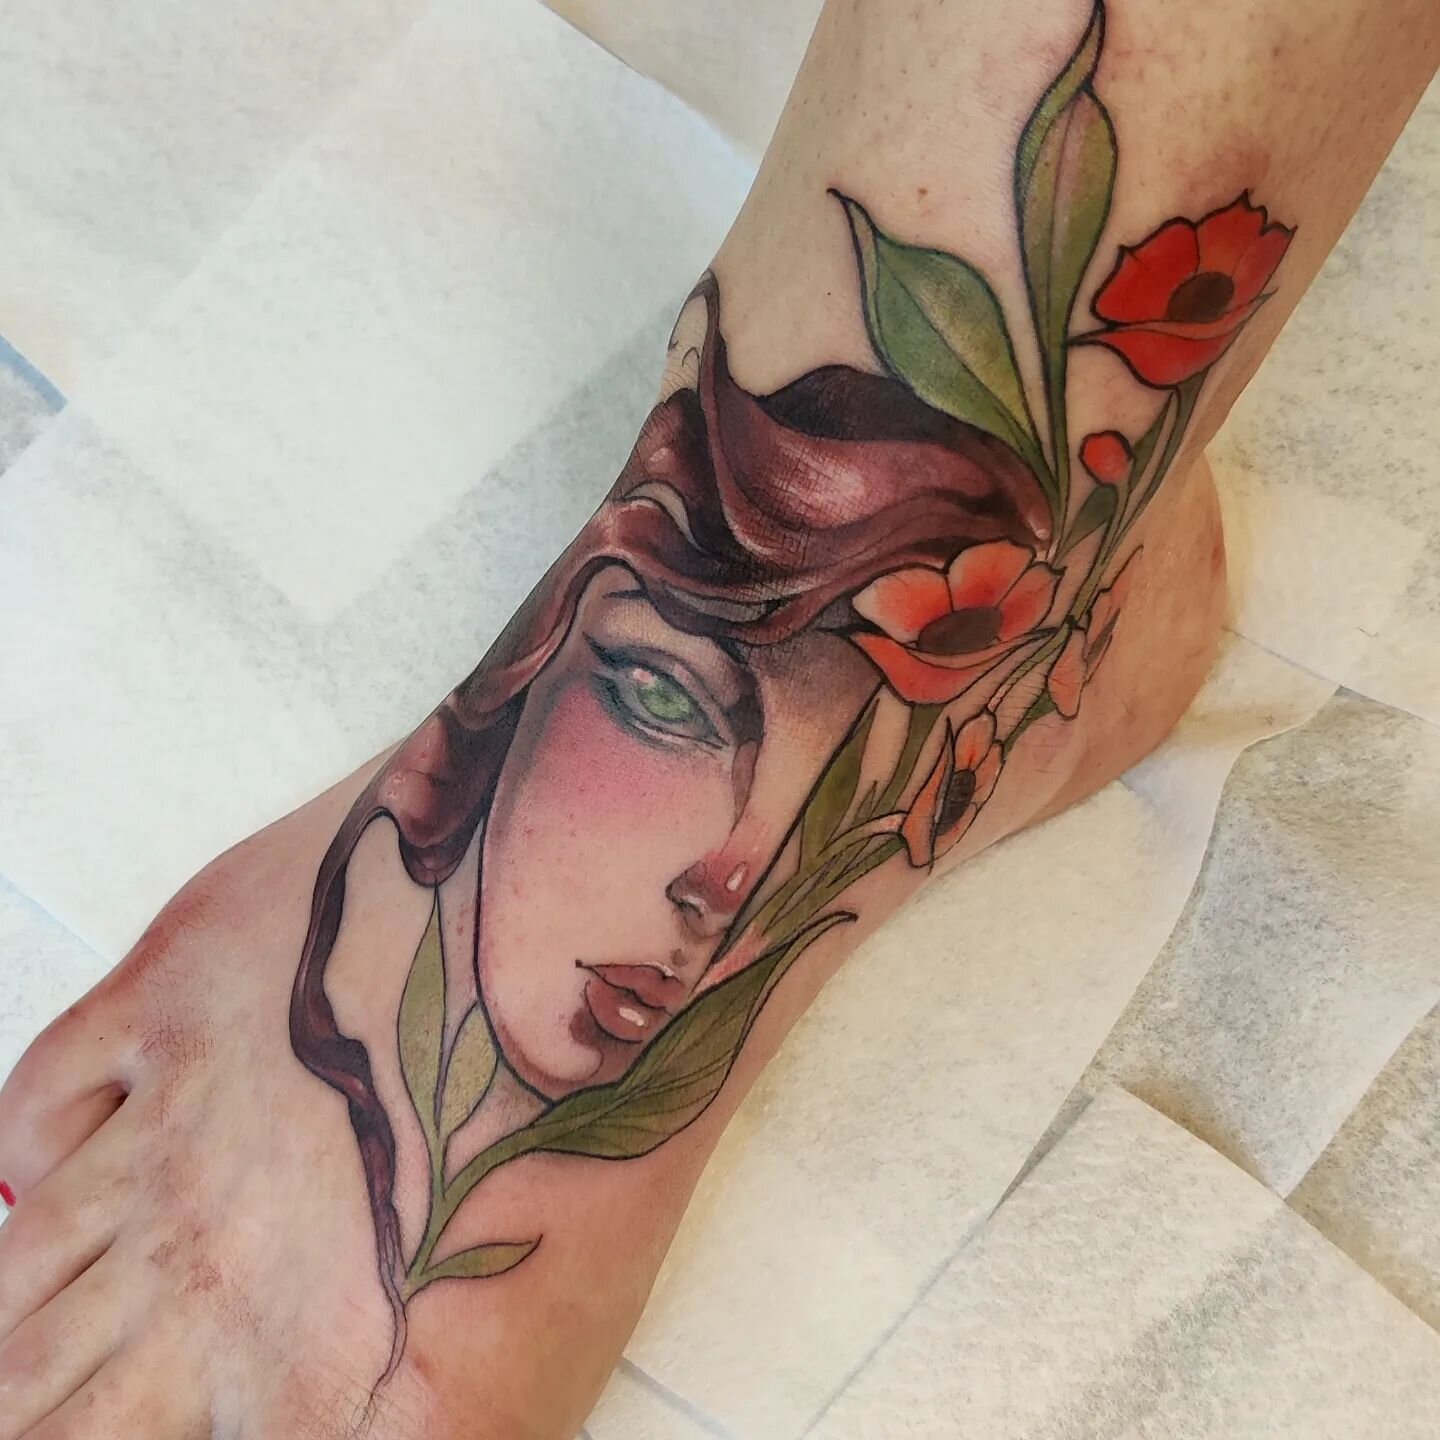 This super lovely lady wanted a face and flowers to cover some veins around her feet. ❤️ Tattoos with flow can be perfect for covering scars and visible veins. Very fun end to the week, woop.